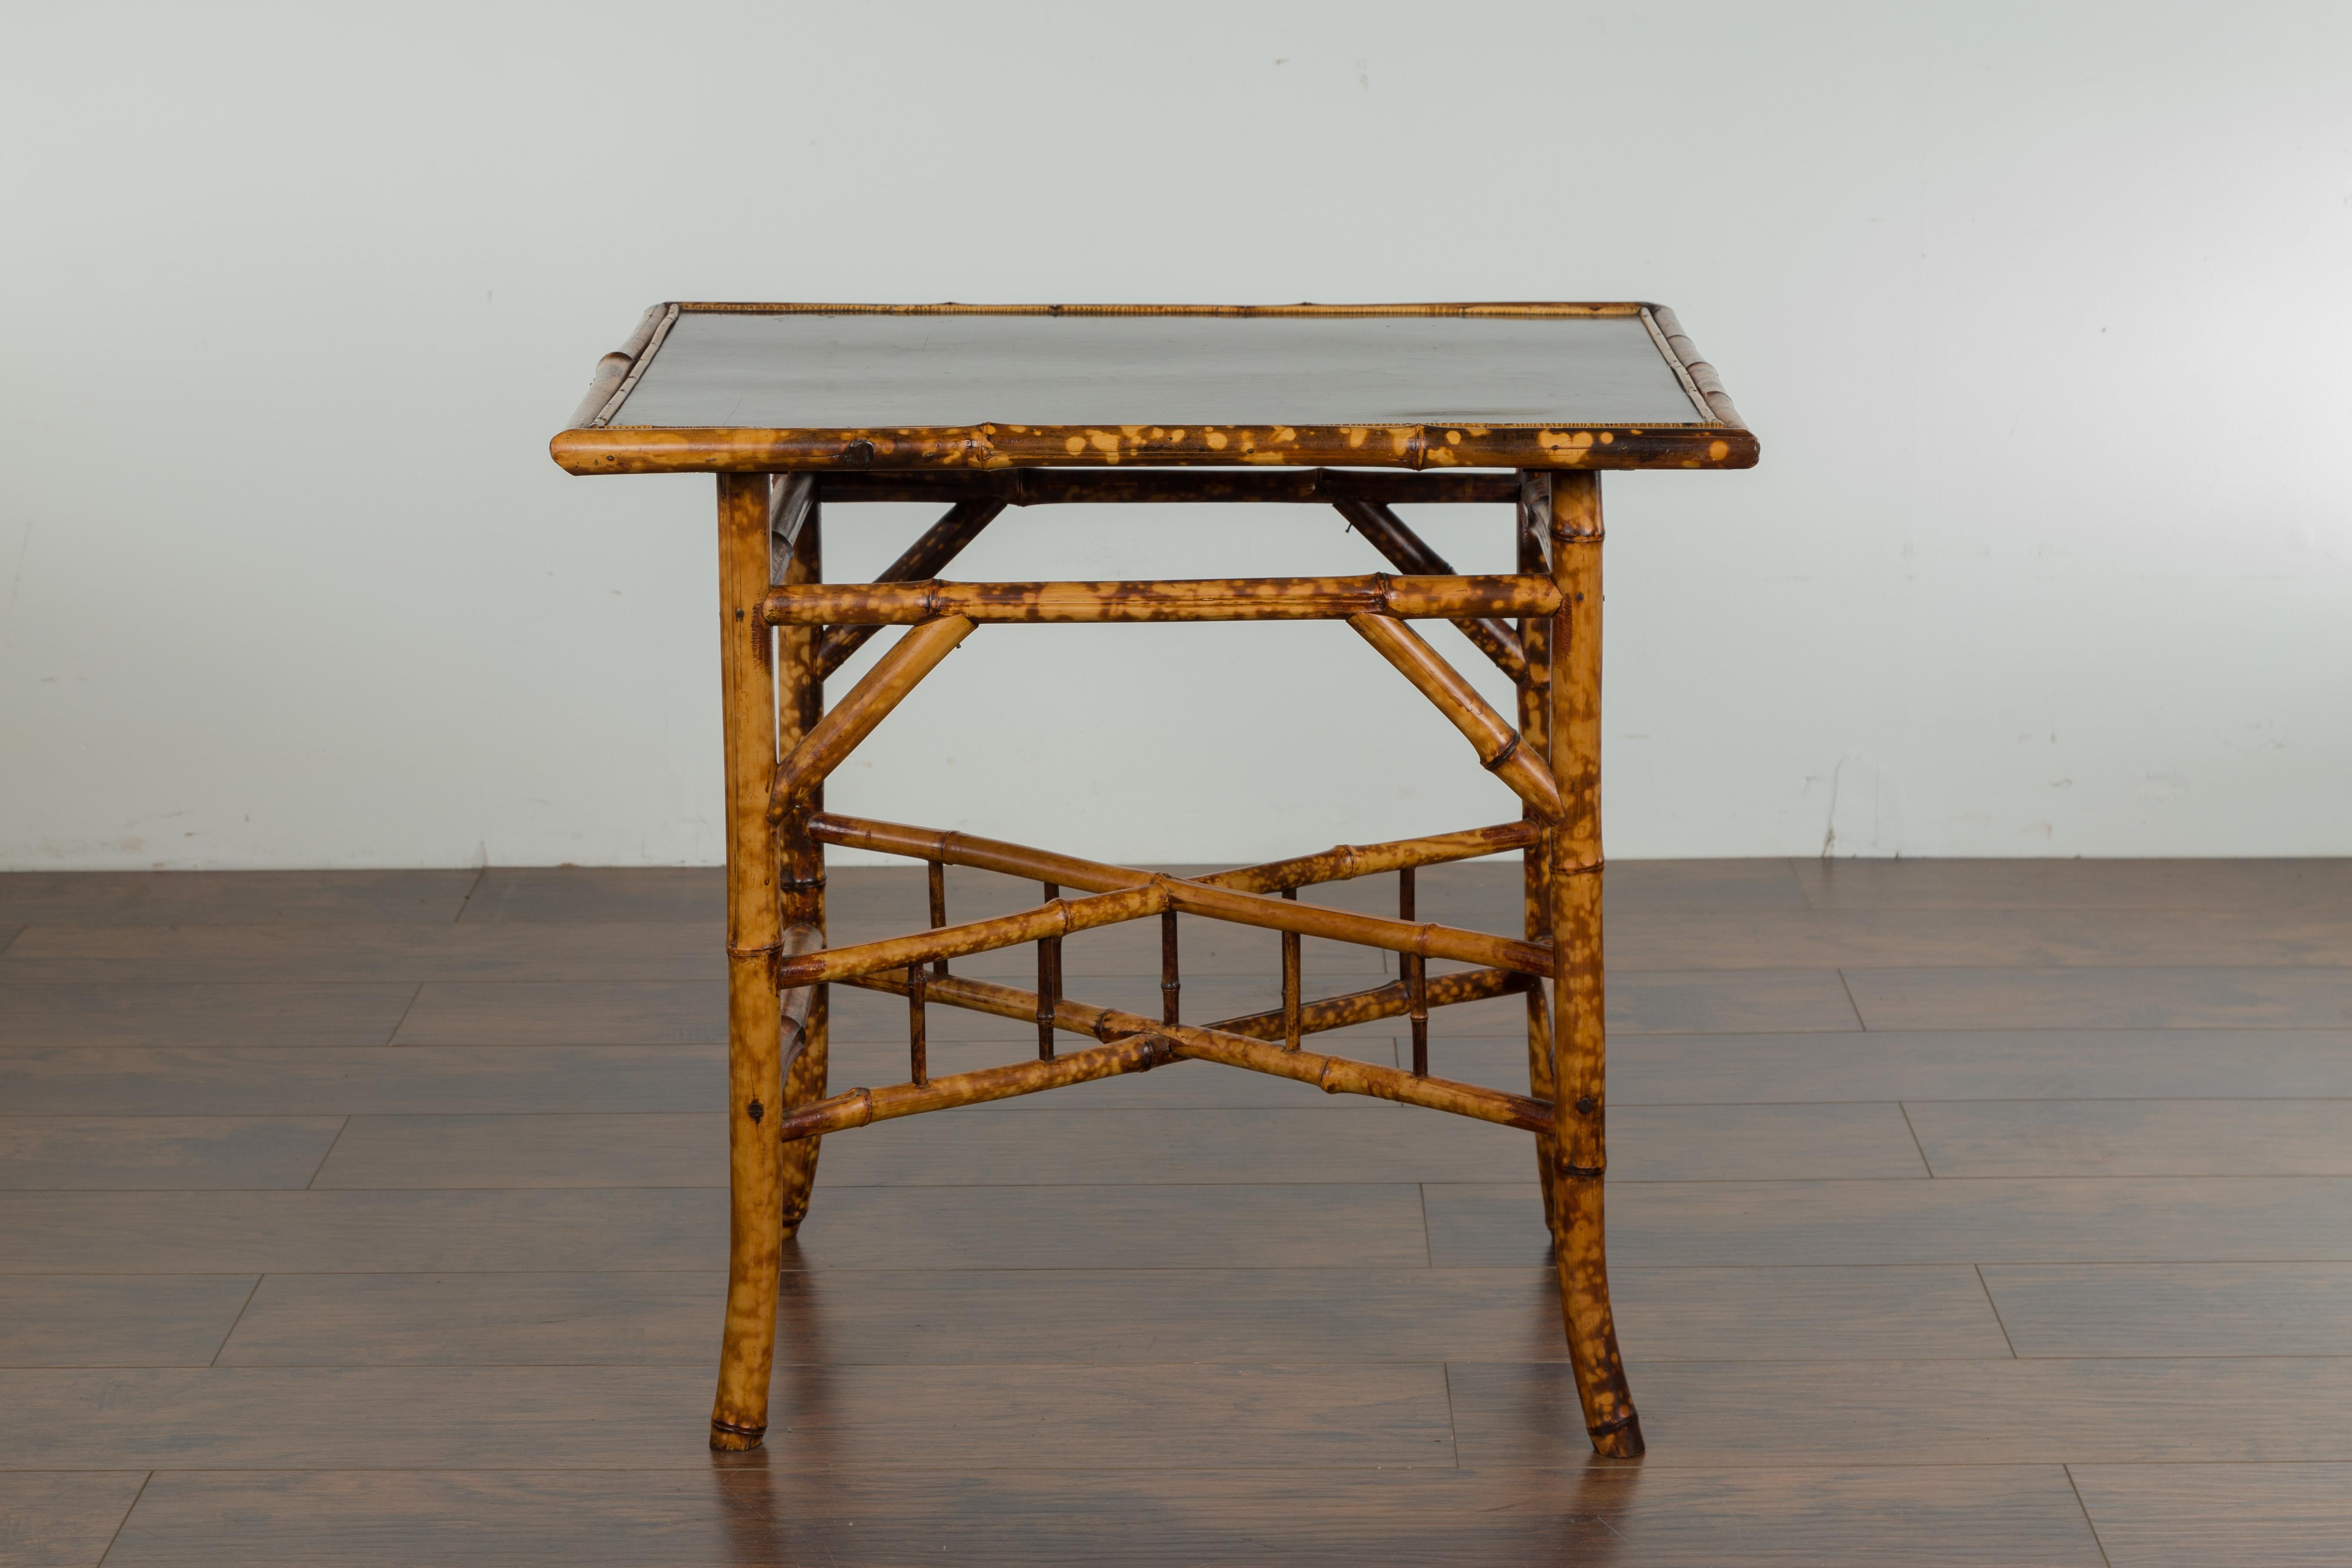 An English bamboo side table from the early 20th century, with ebonized top. Created in England during the first quarter of the 20th century, this side table features a rectangular ebonized top with geometric motifs, sitting above a bamboo base made